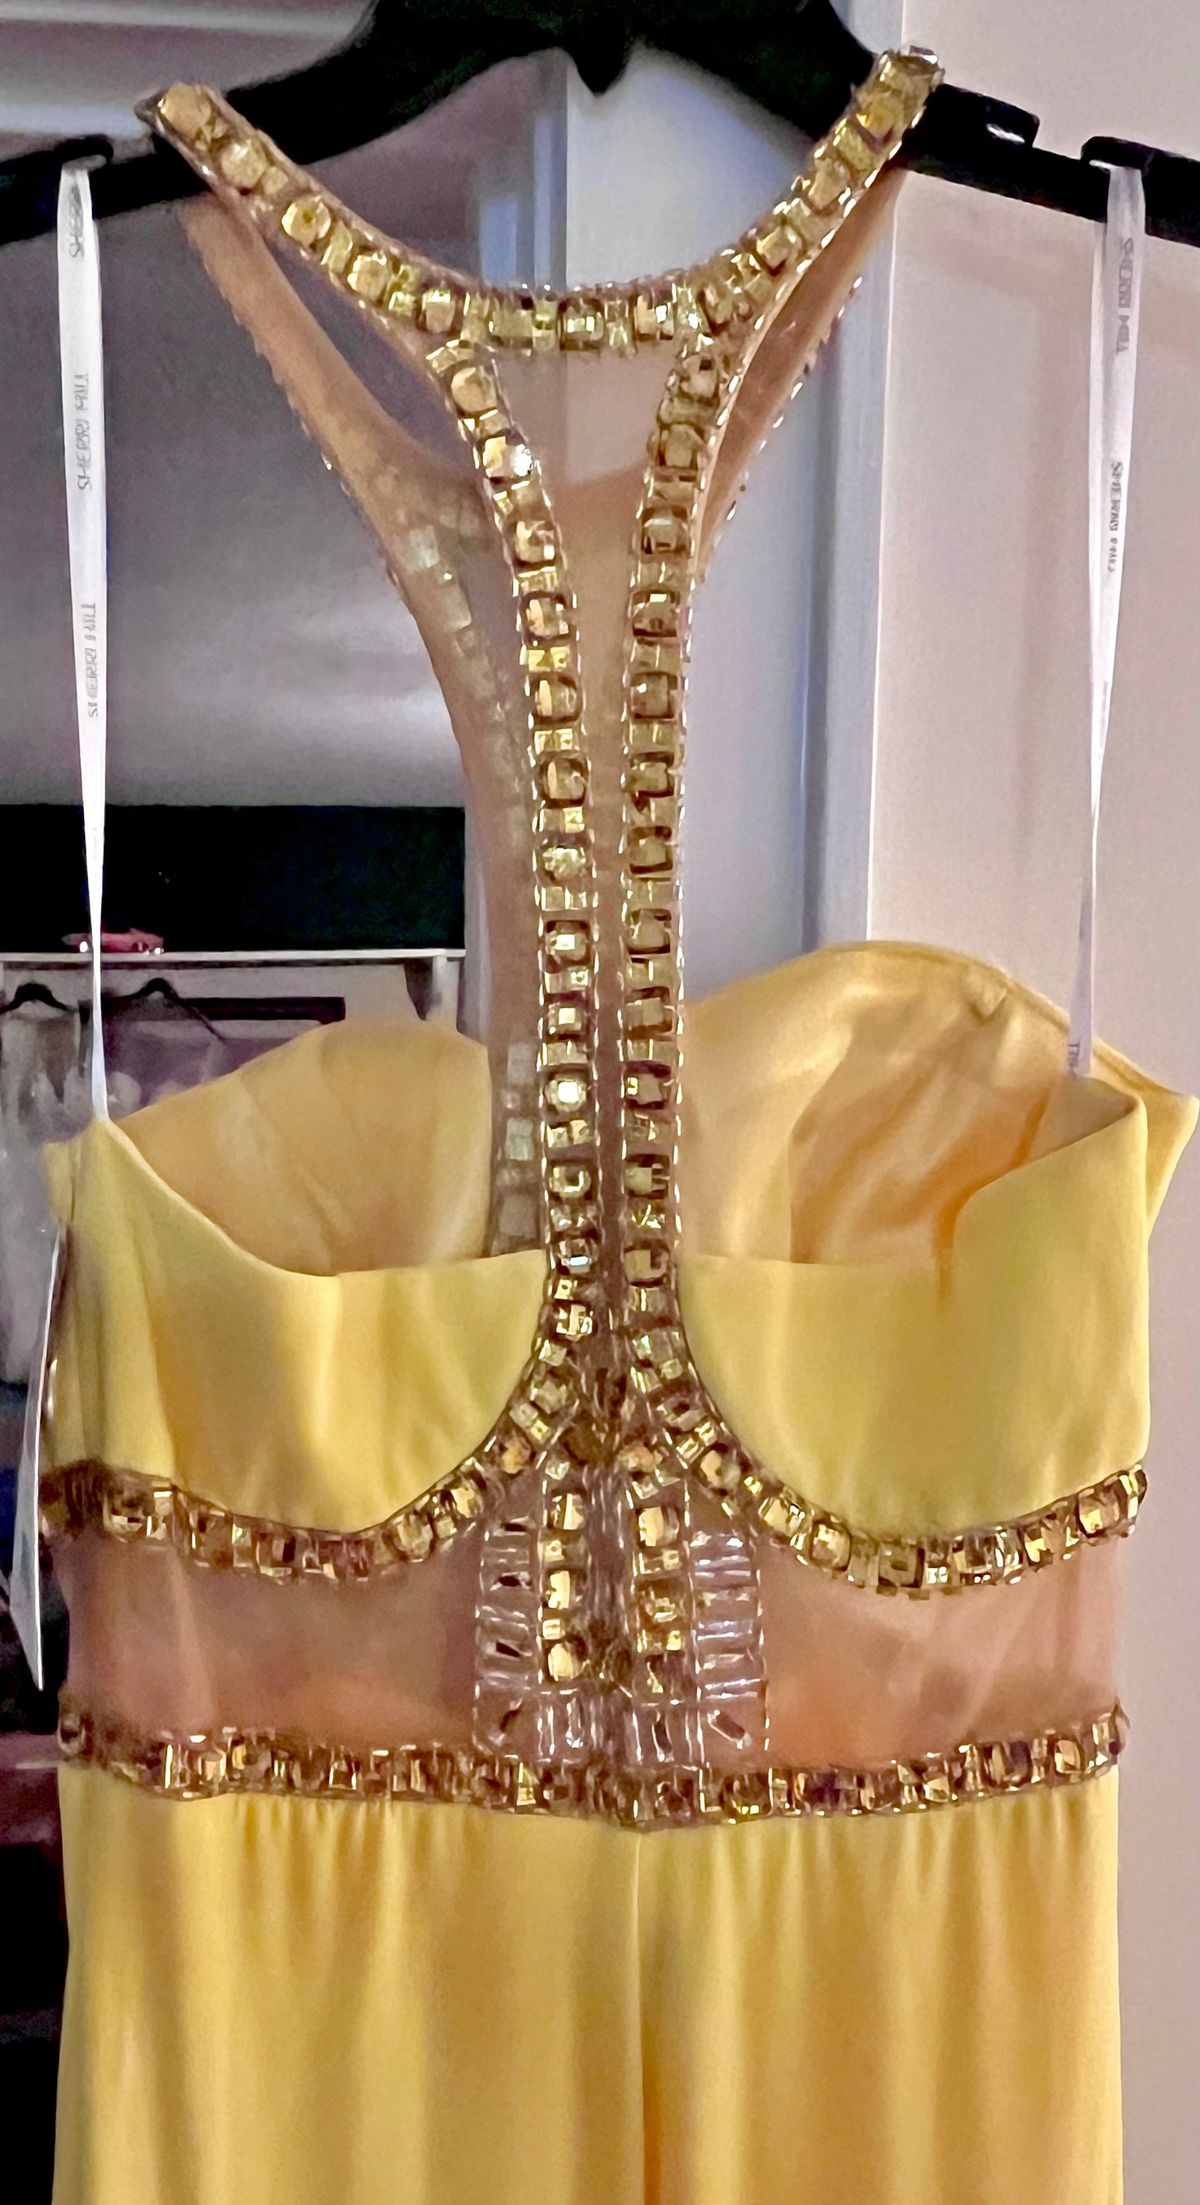 Sherri Hill Size 12 Prom Halter Yellow Floor Length Maxi on Queenly